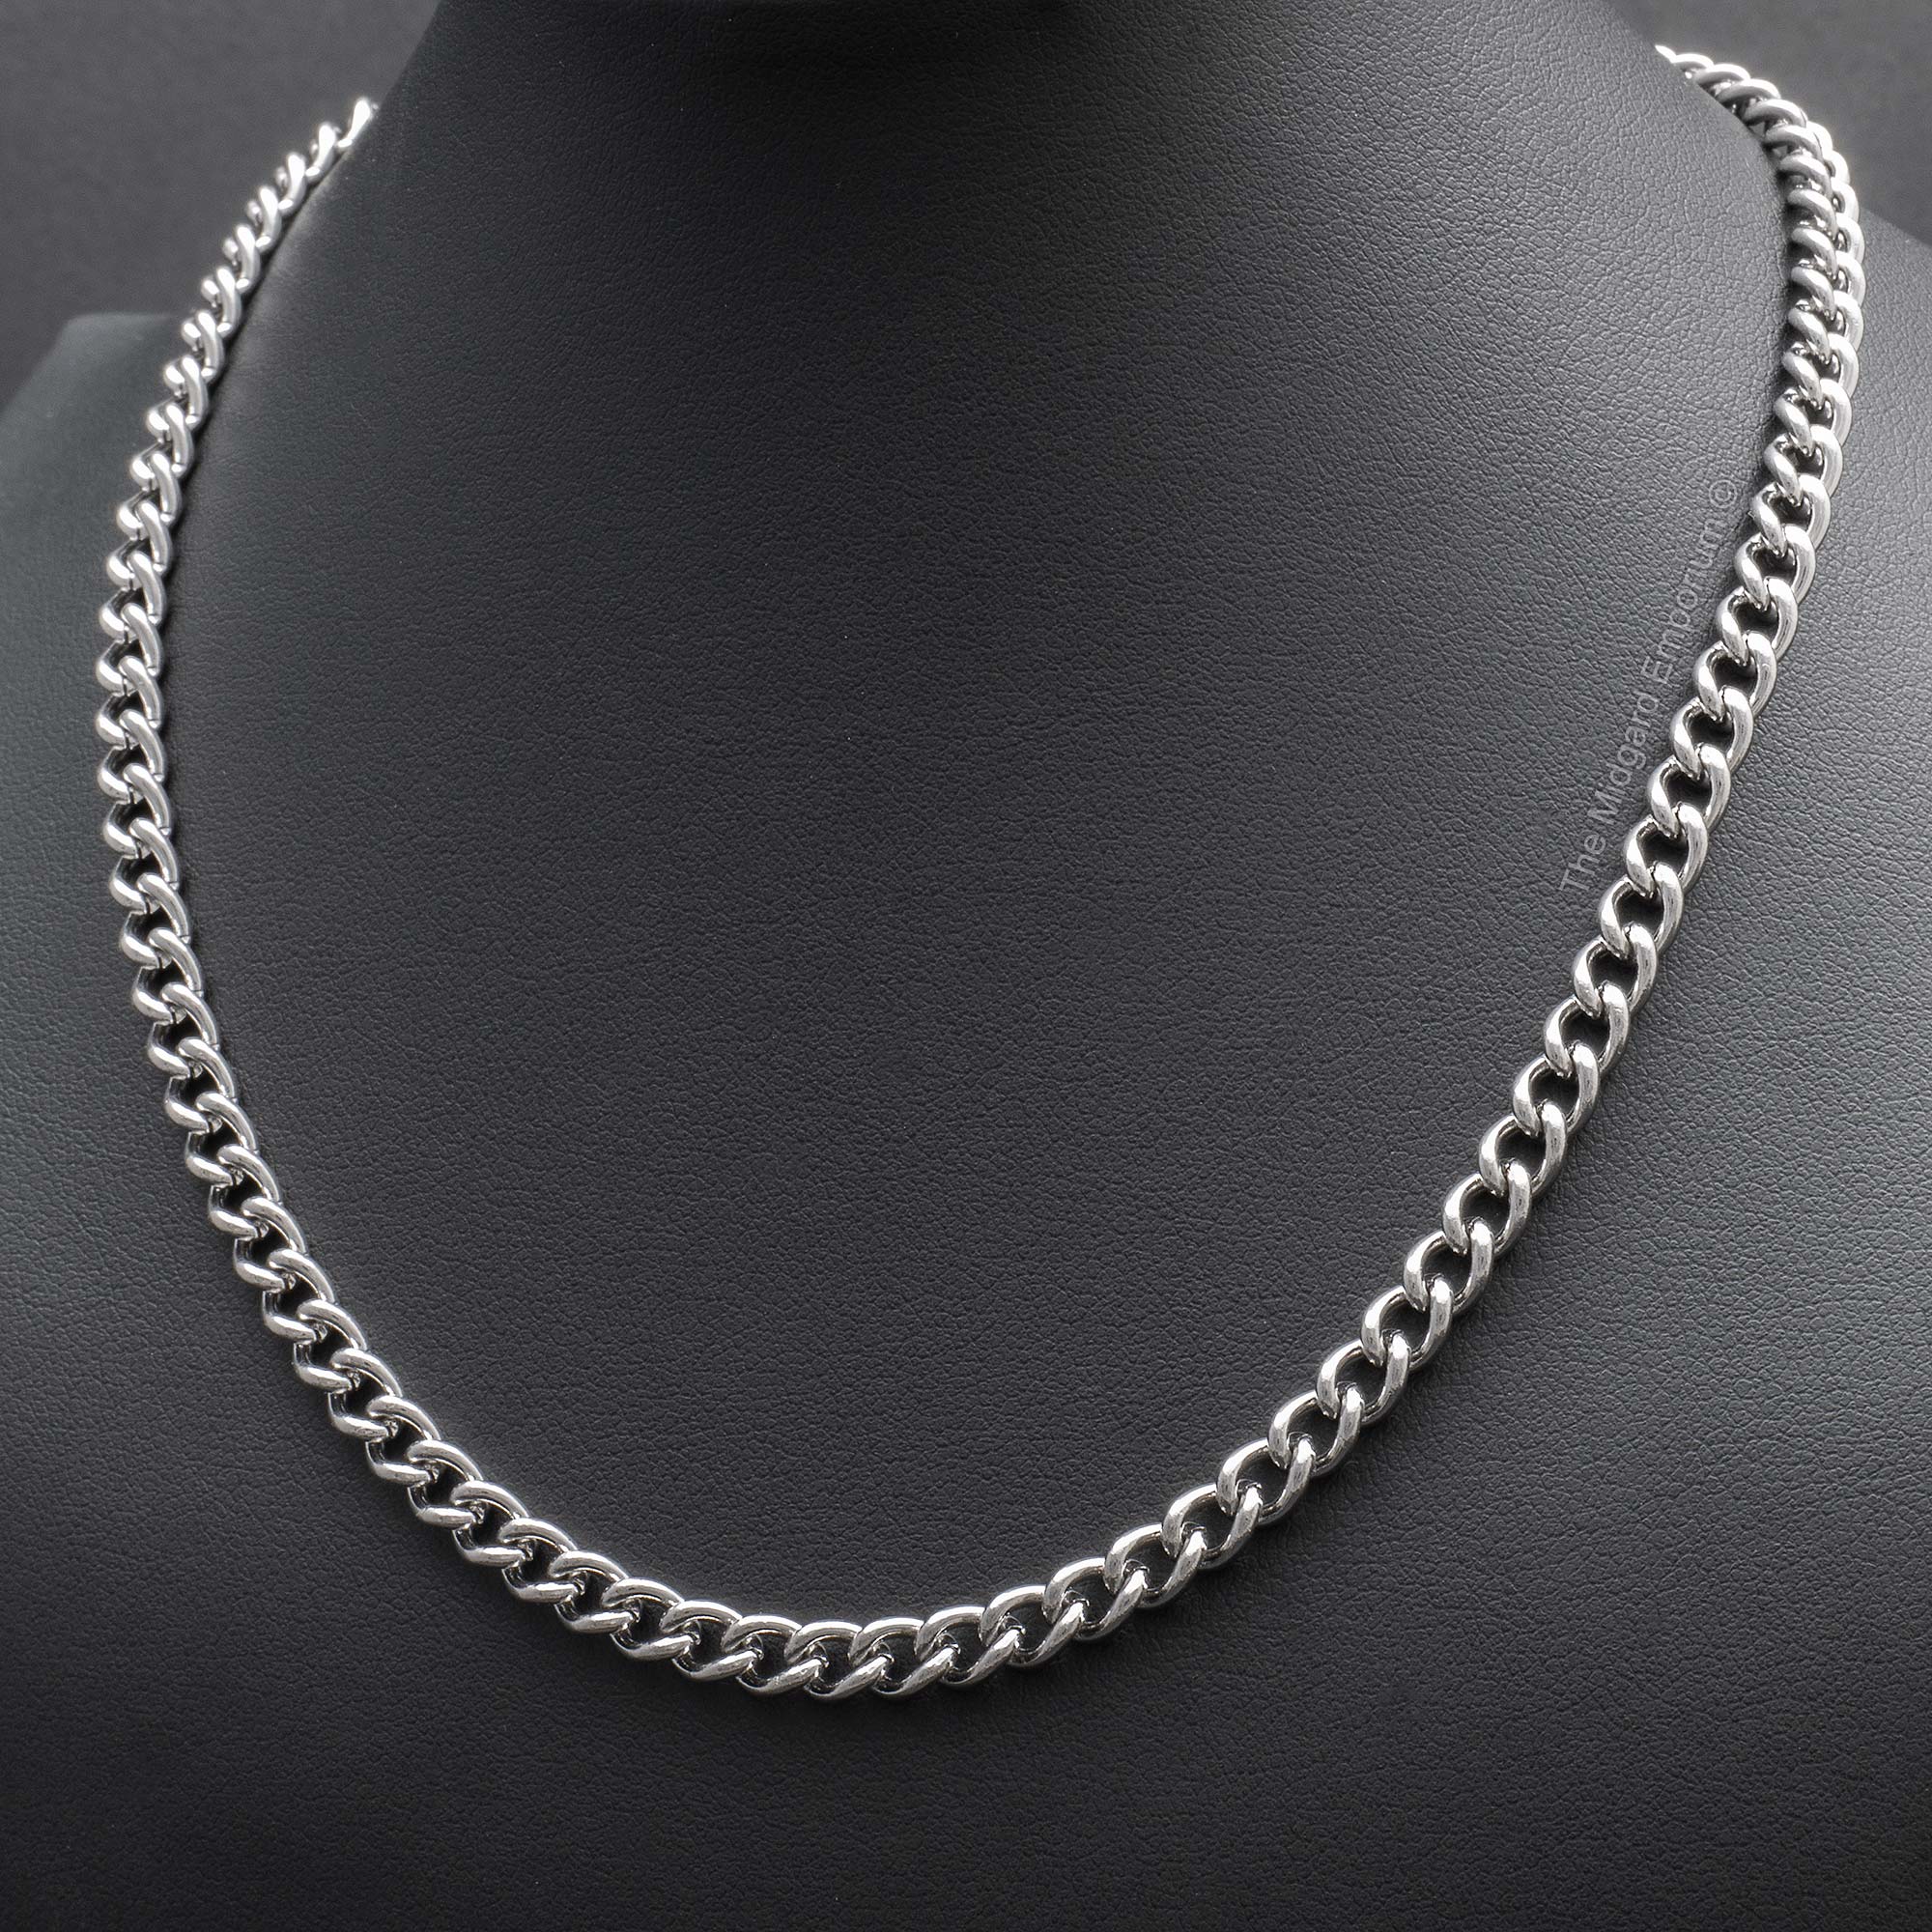 5mm Stainless Steel Curb Chain Necklace - The Midgard Emporium